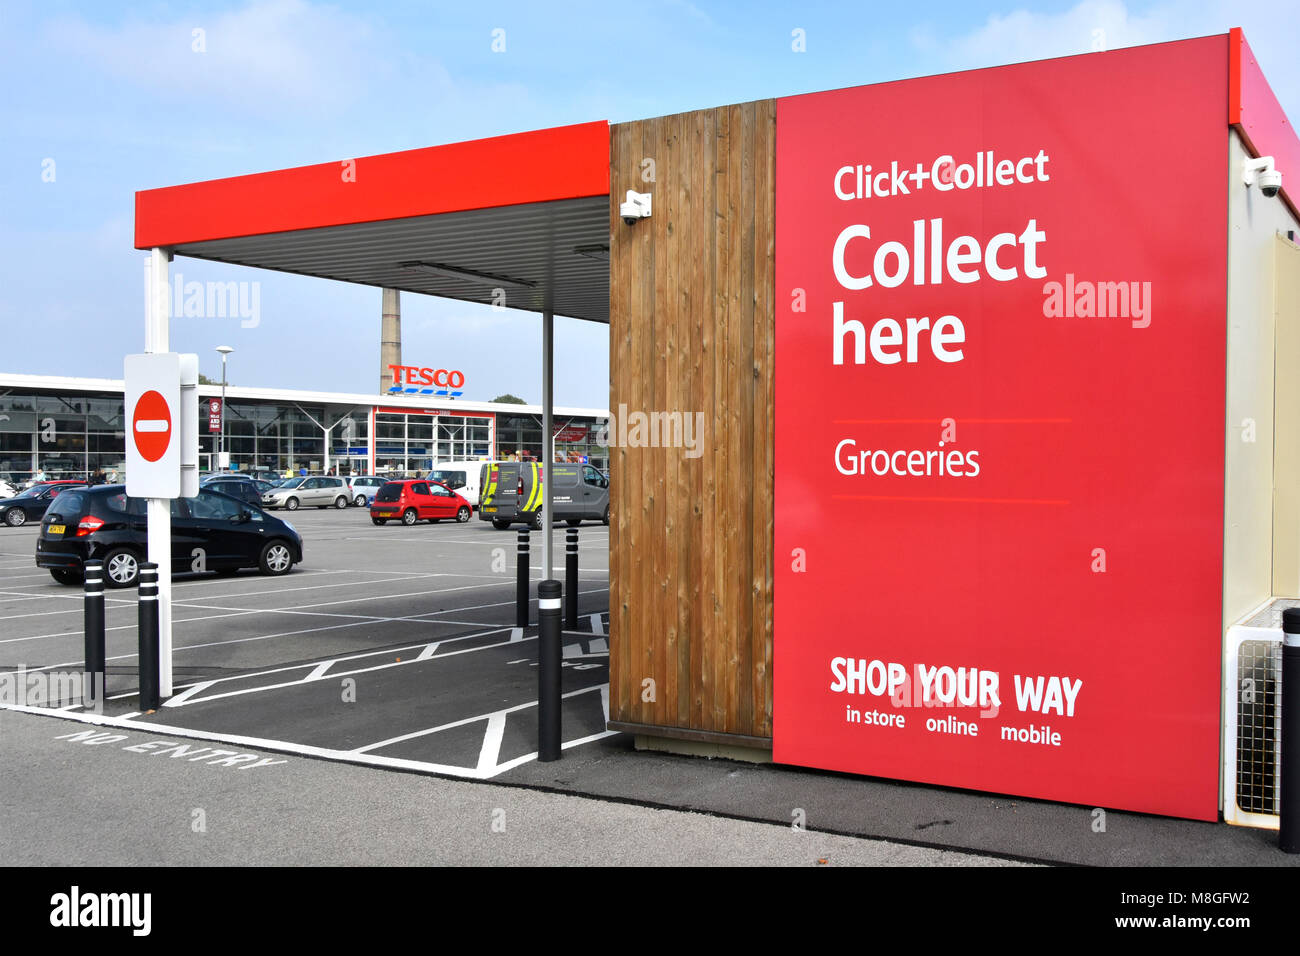 Red Tesco superstore supermarket click and collect under cover groceries facility in car park online internet grocery shopping Cambridge England UK Stock Photo